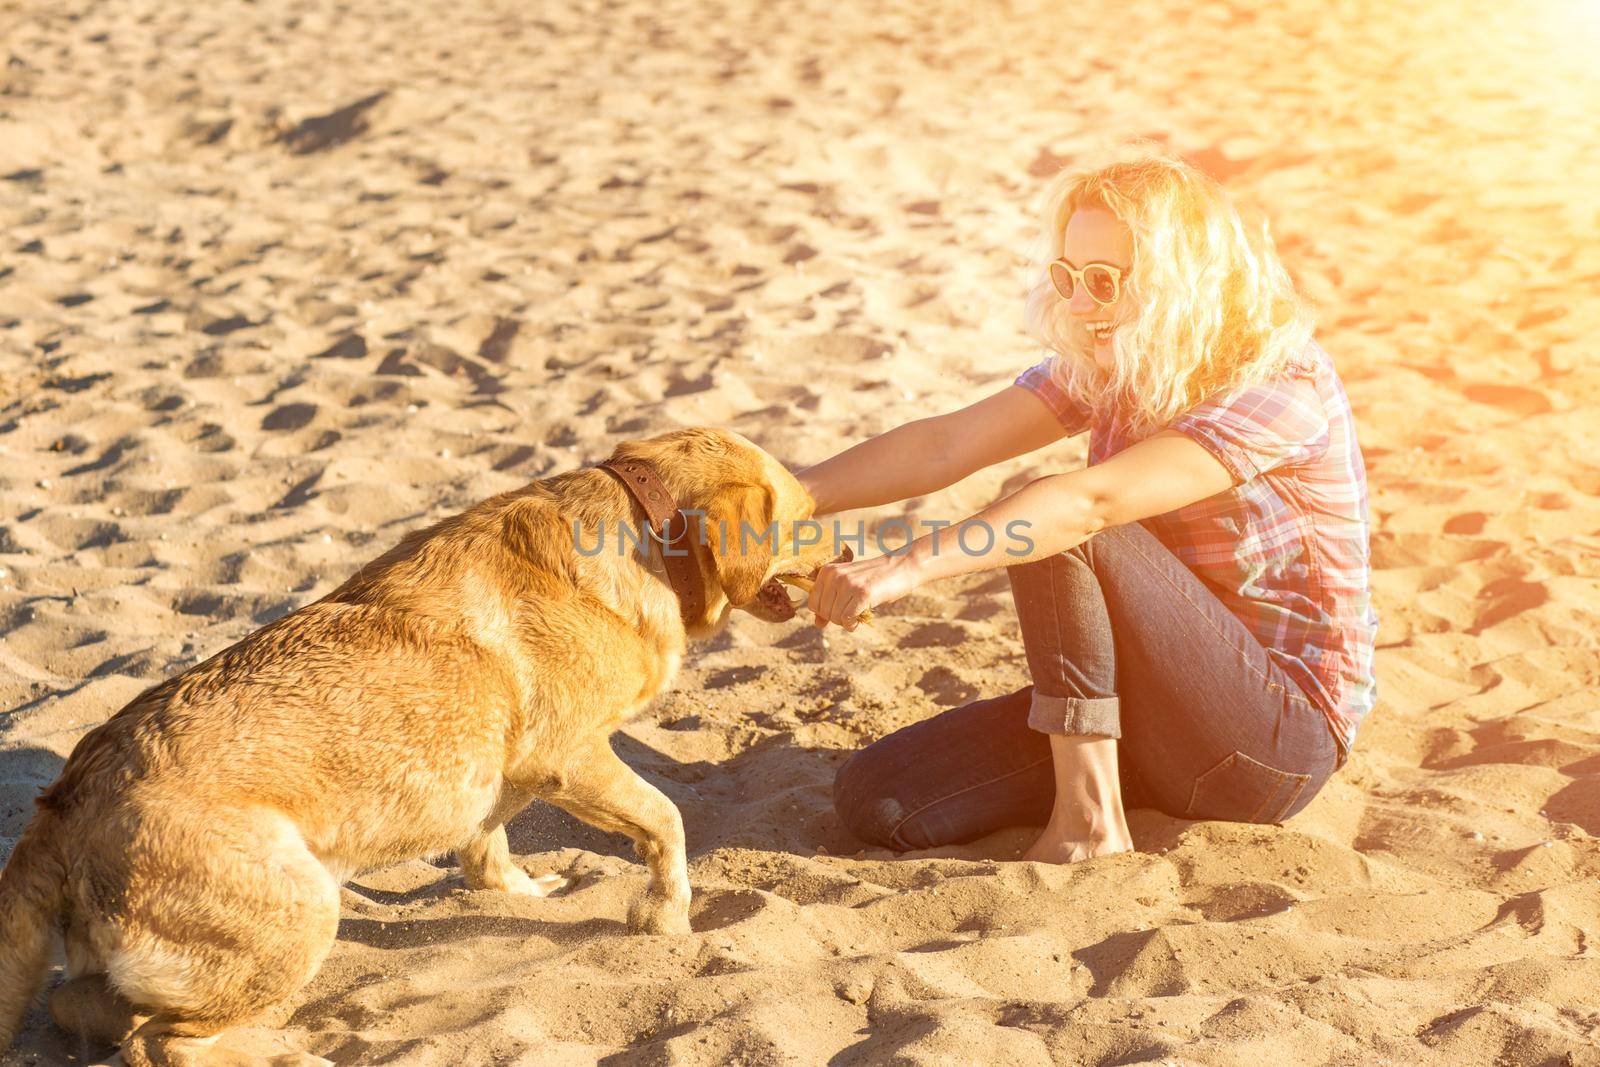 Portrait of young beautiful woman in sunglasses sitting on sand beach with golden retriever dog. Girl with dog by sea. Happiness and friendship. Pet and woman. Woman playing with dog on sea shore. Sun flare